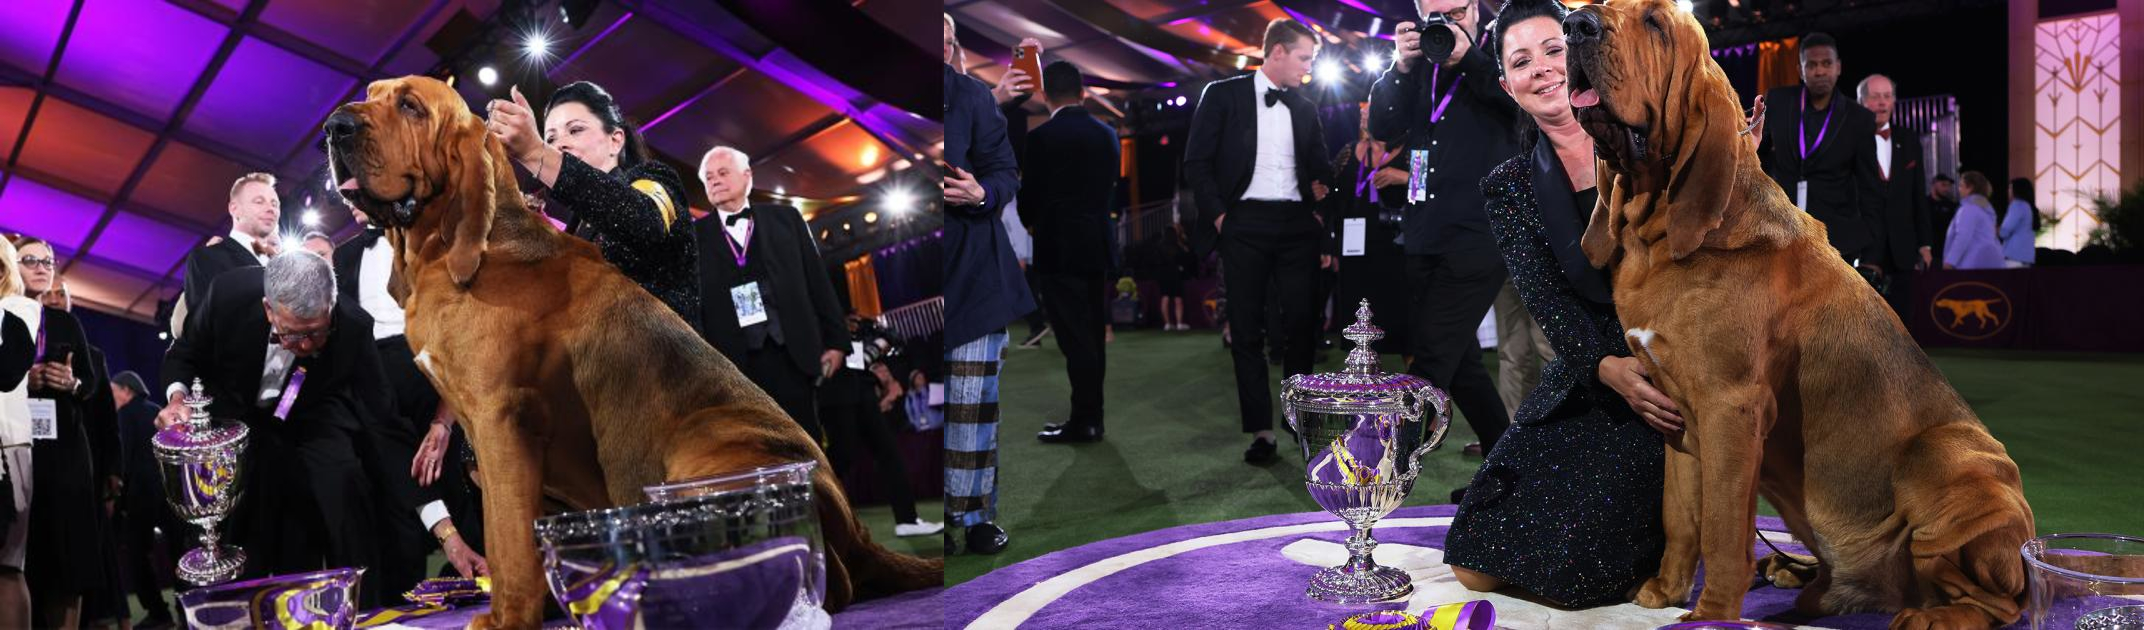 Who Won 146th Westminster Dog Show In 2022 Winner Name Revealed, Prize